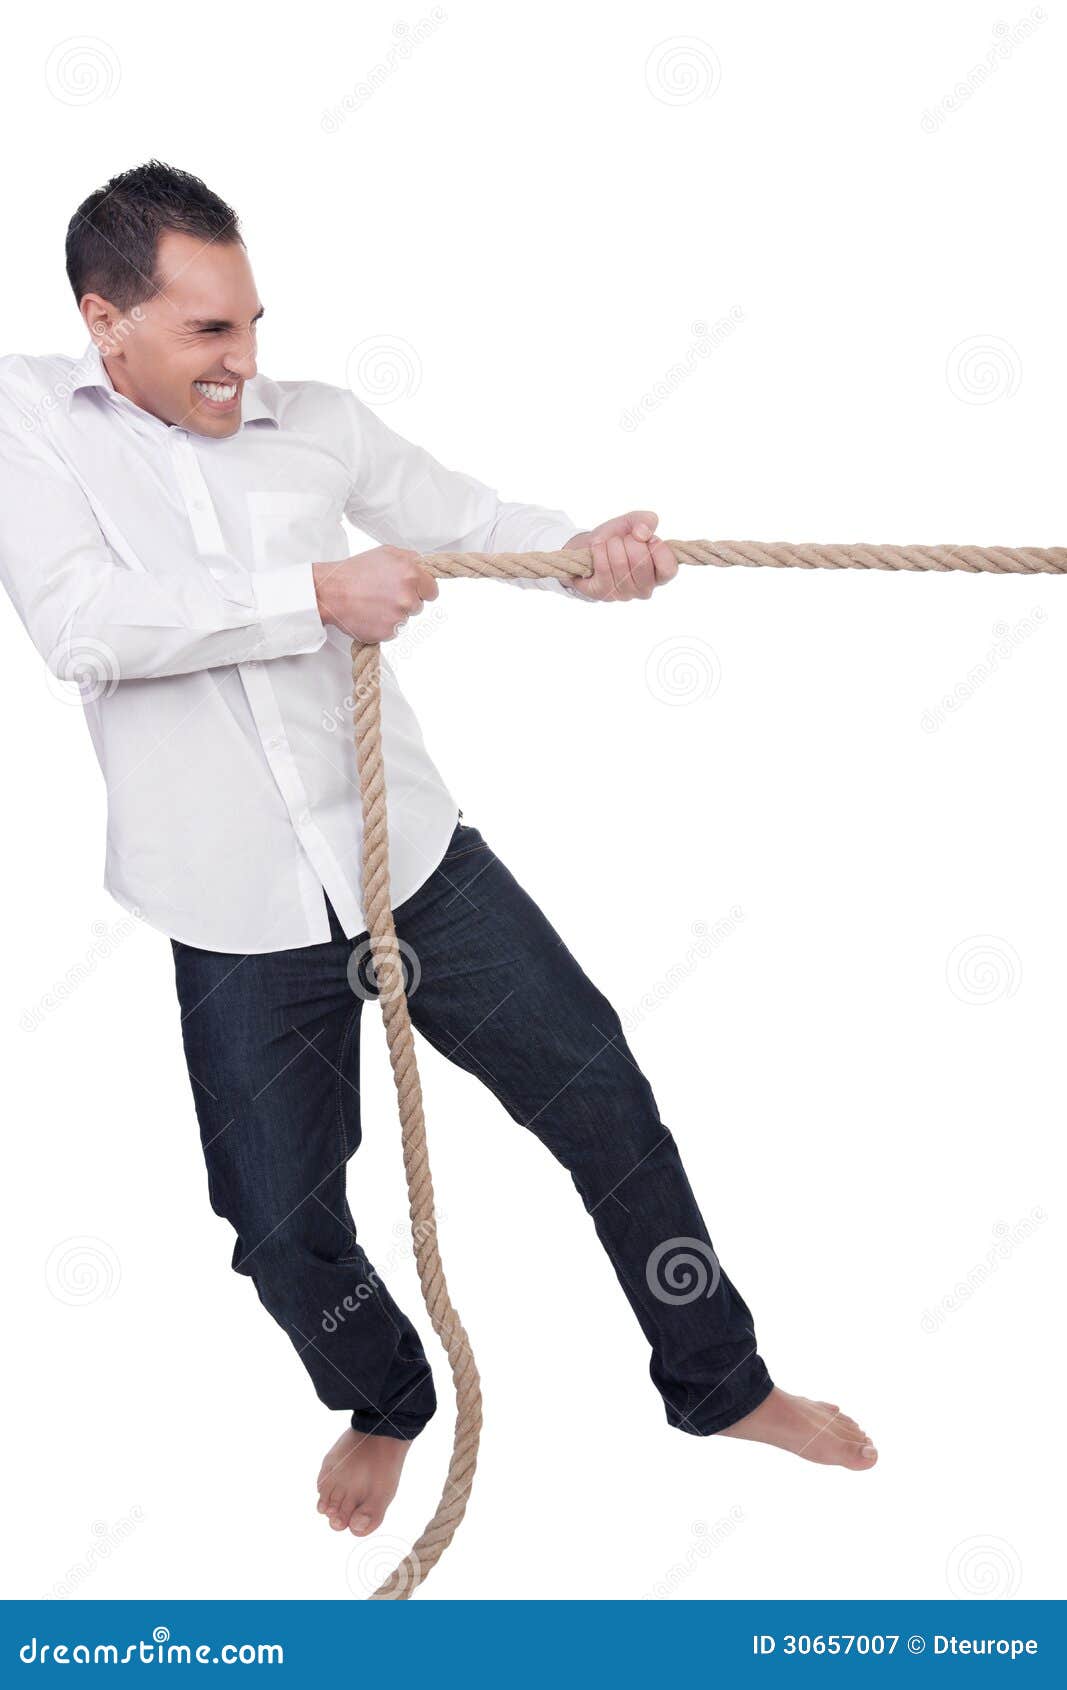 Man pulling on a rope stock image. Image of contest, rope - 30657007